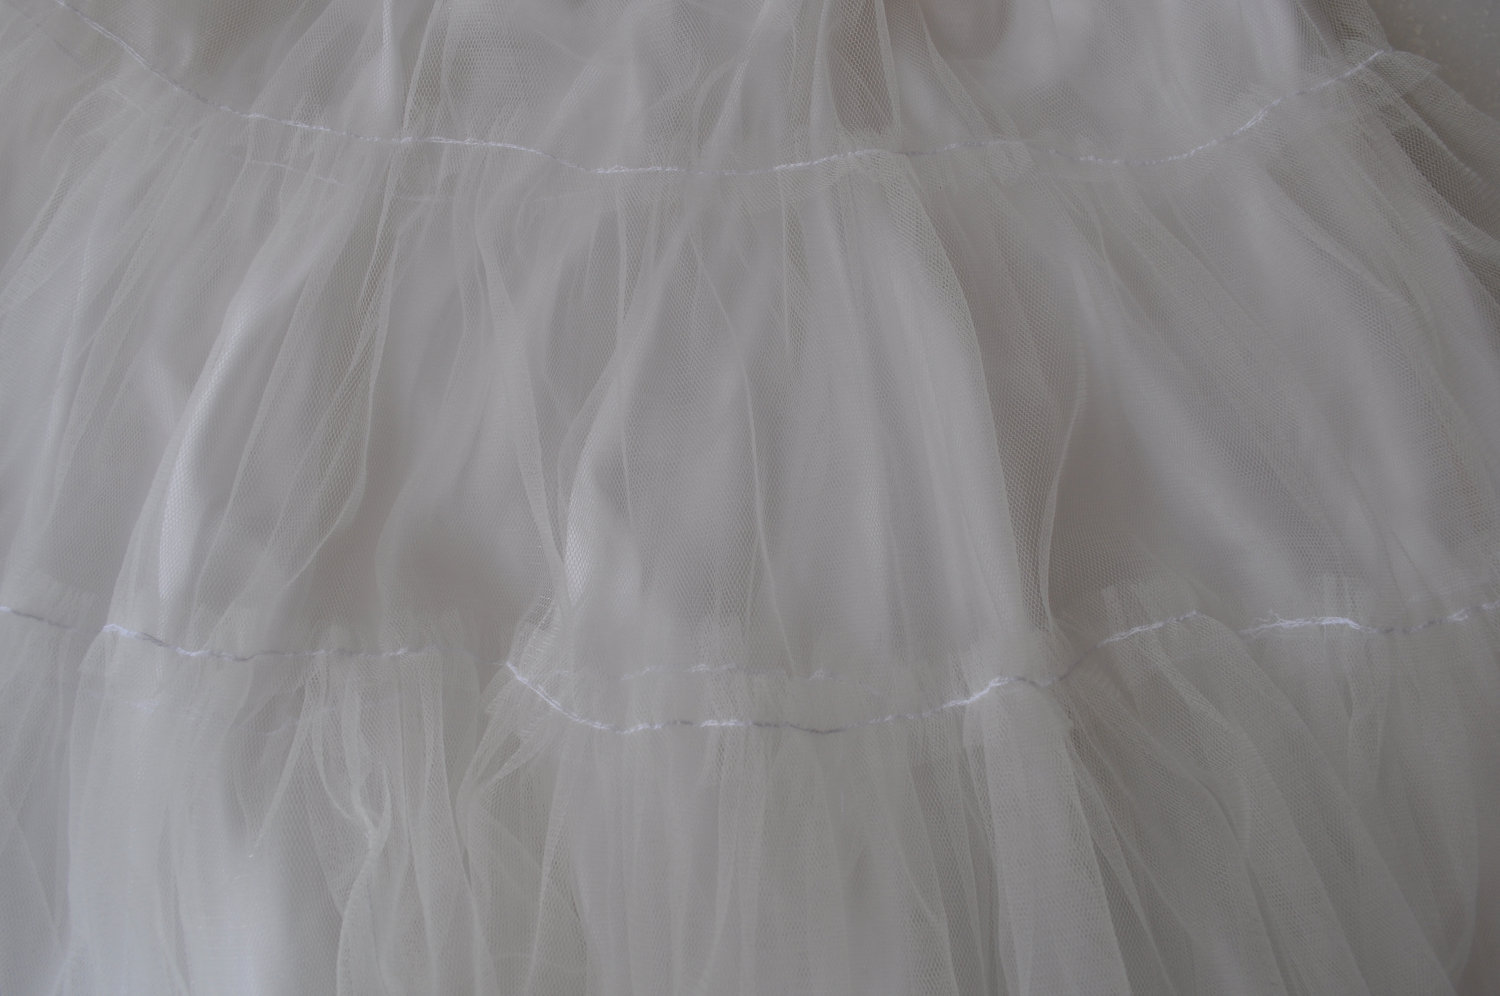 Fluffy, White Petticoat Lined With Silk - For Romantic Dresses on Luulla